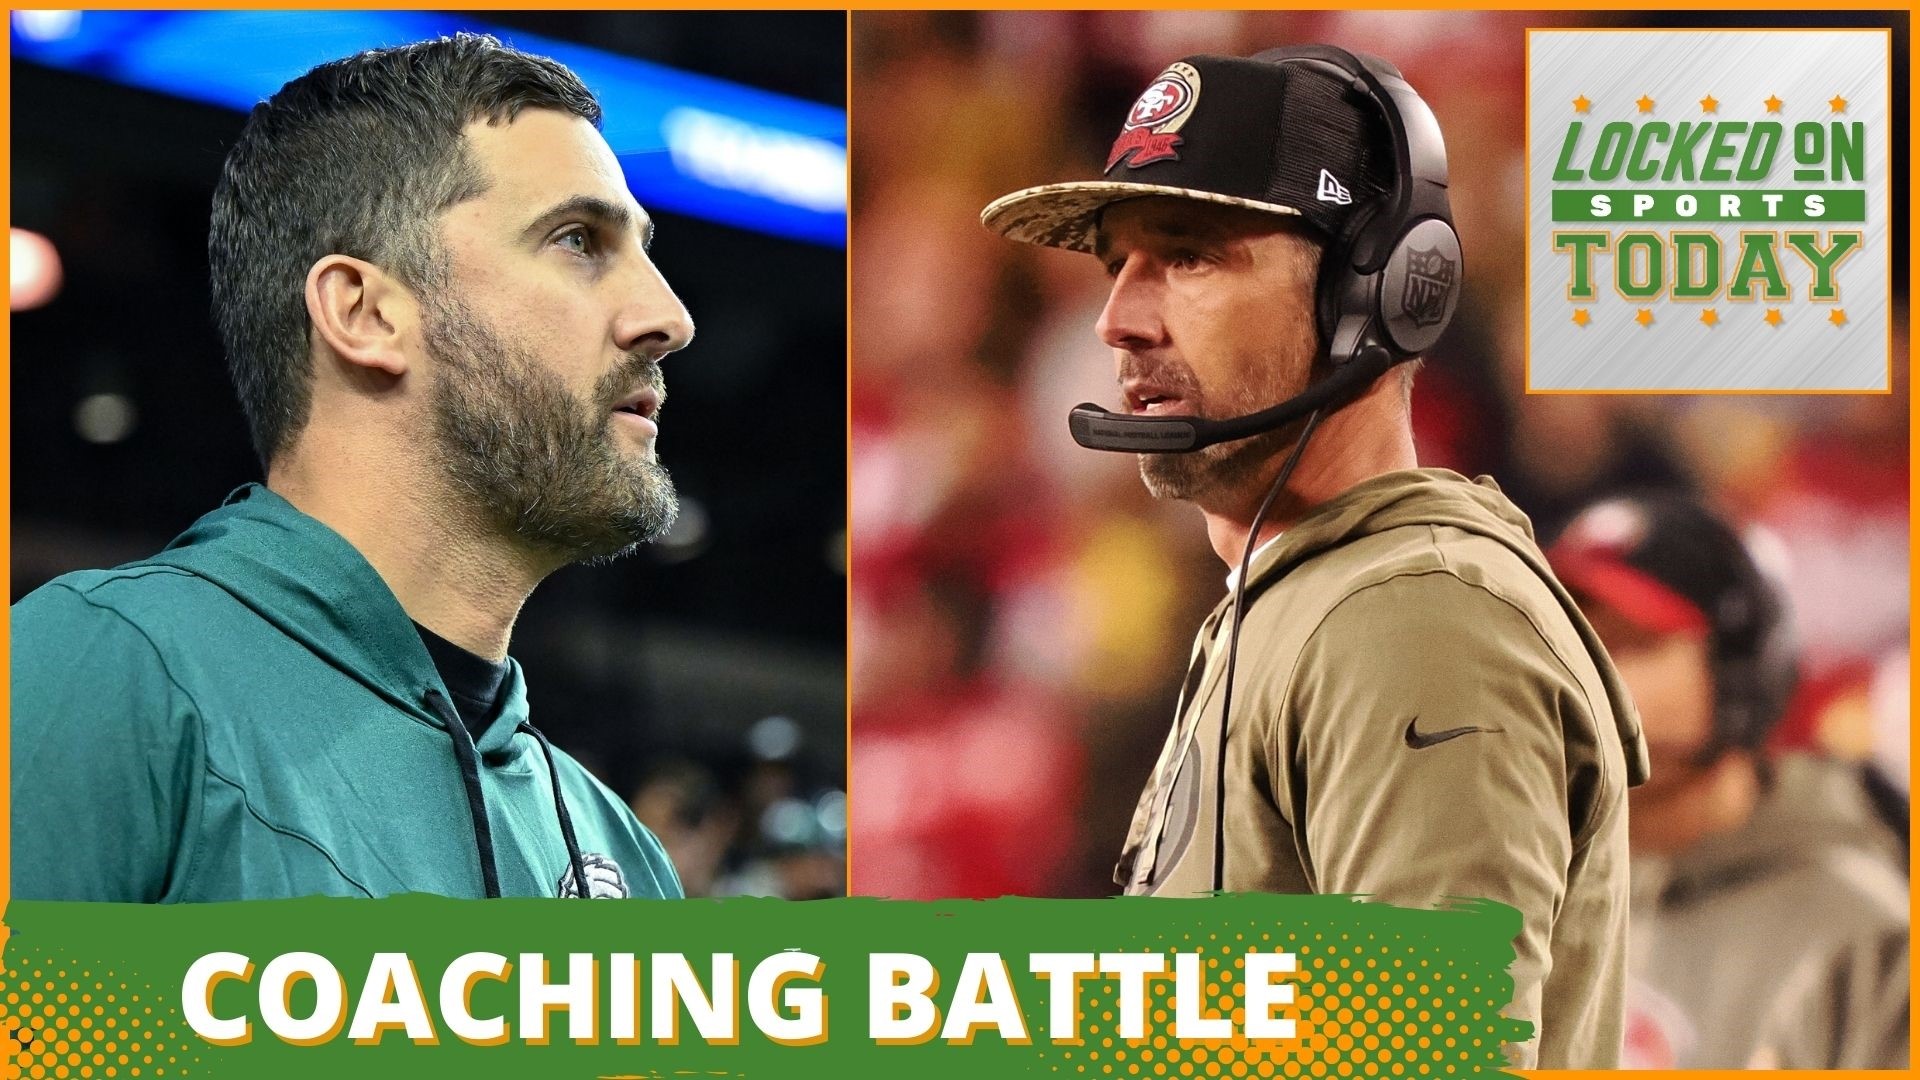 Discussing the day's top sports stories from the NFL coaching battle that could take the NFC title to what the Chiefs need to do to beat the Bengals.